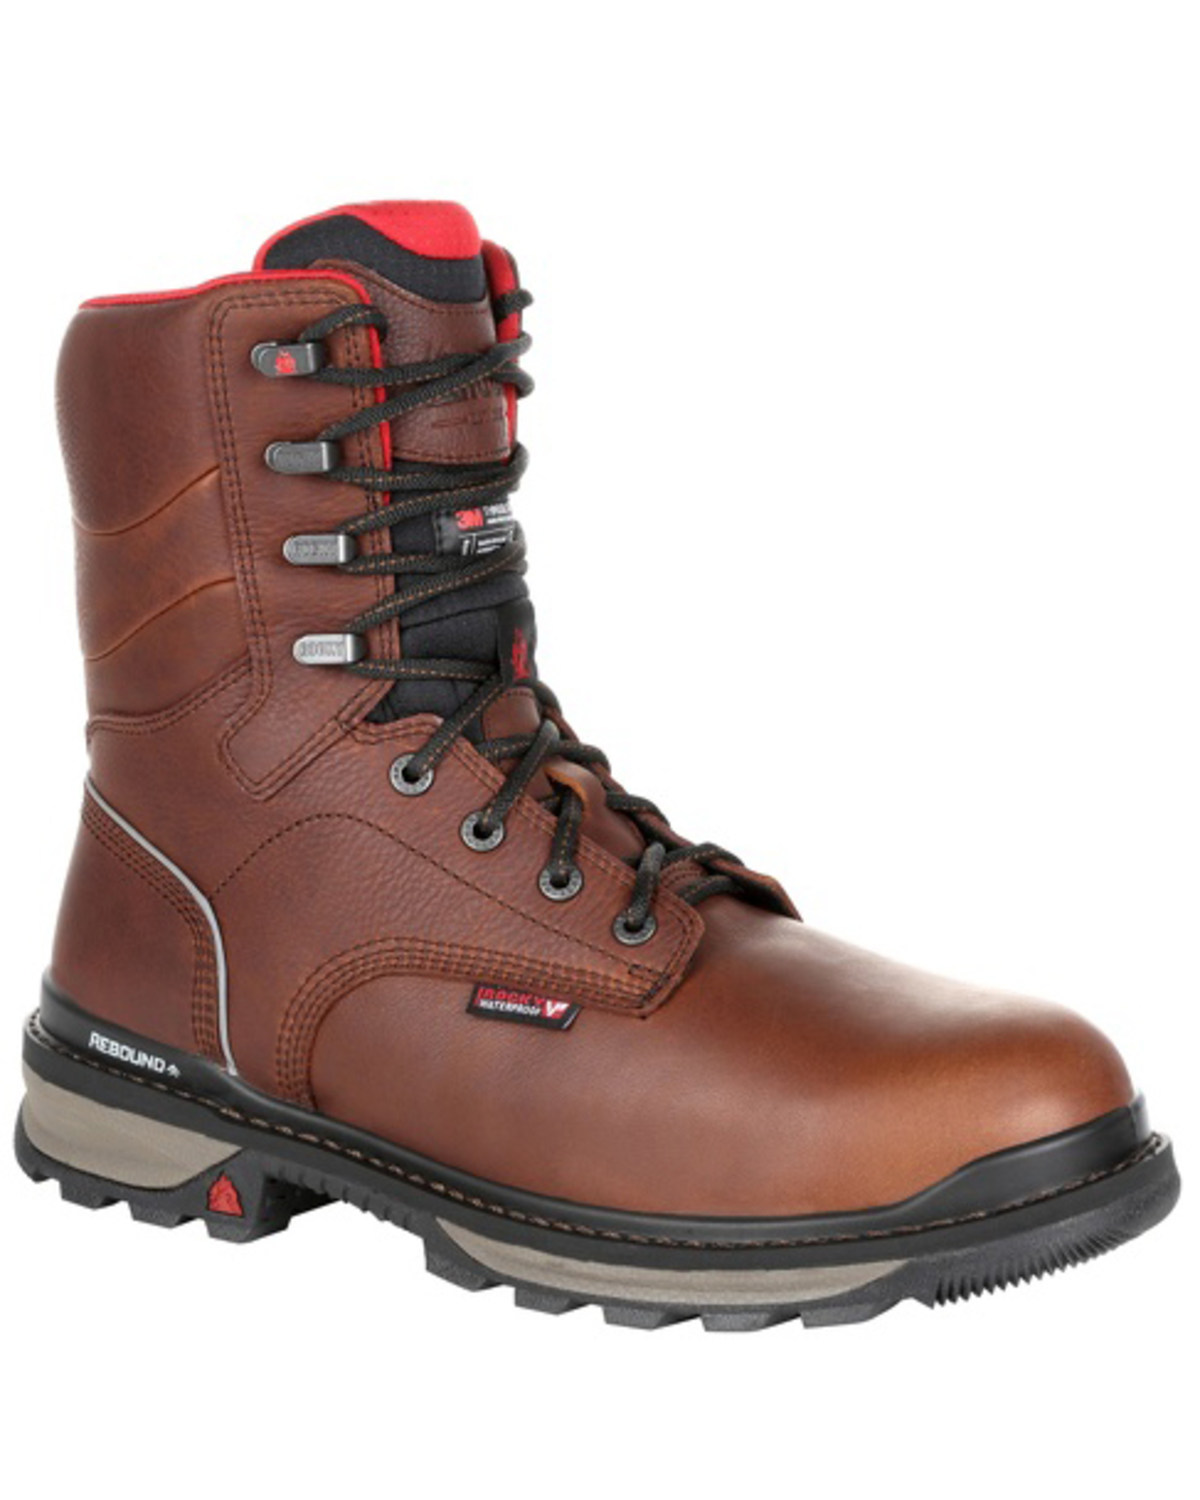 800 gram insulated work boots composite toe